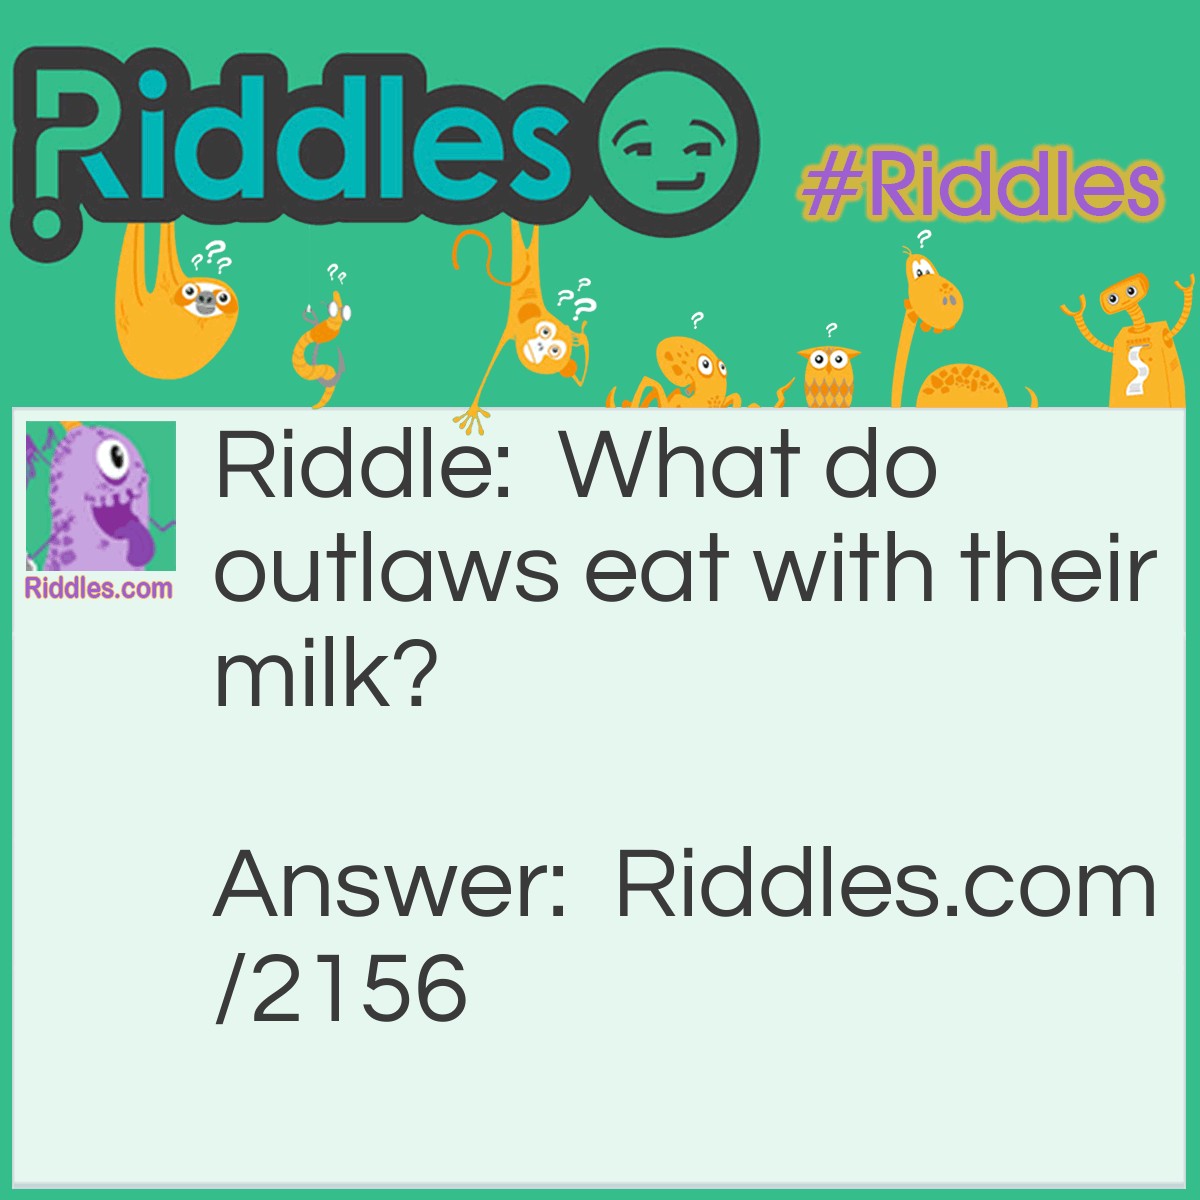 Riddle: What do outlaws eat with their milk? Answer: Crookies.